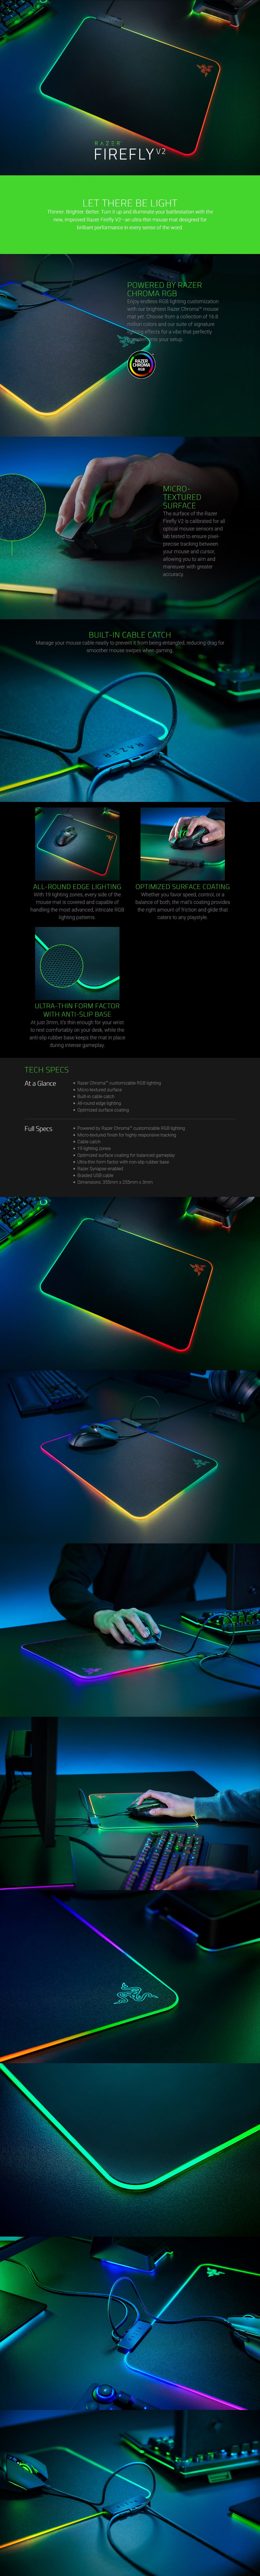 Razer Firefly v2 Chroma RGB Hard Gaming Mouse Pad - Overview 1